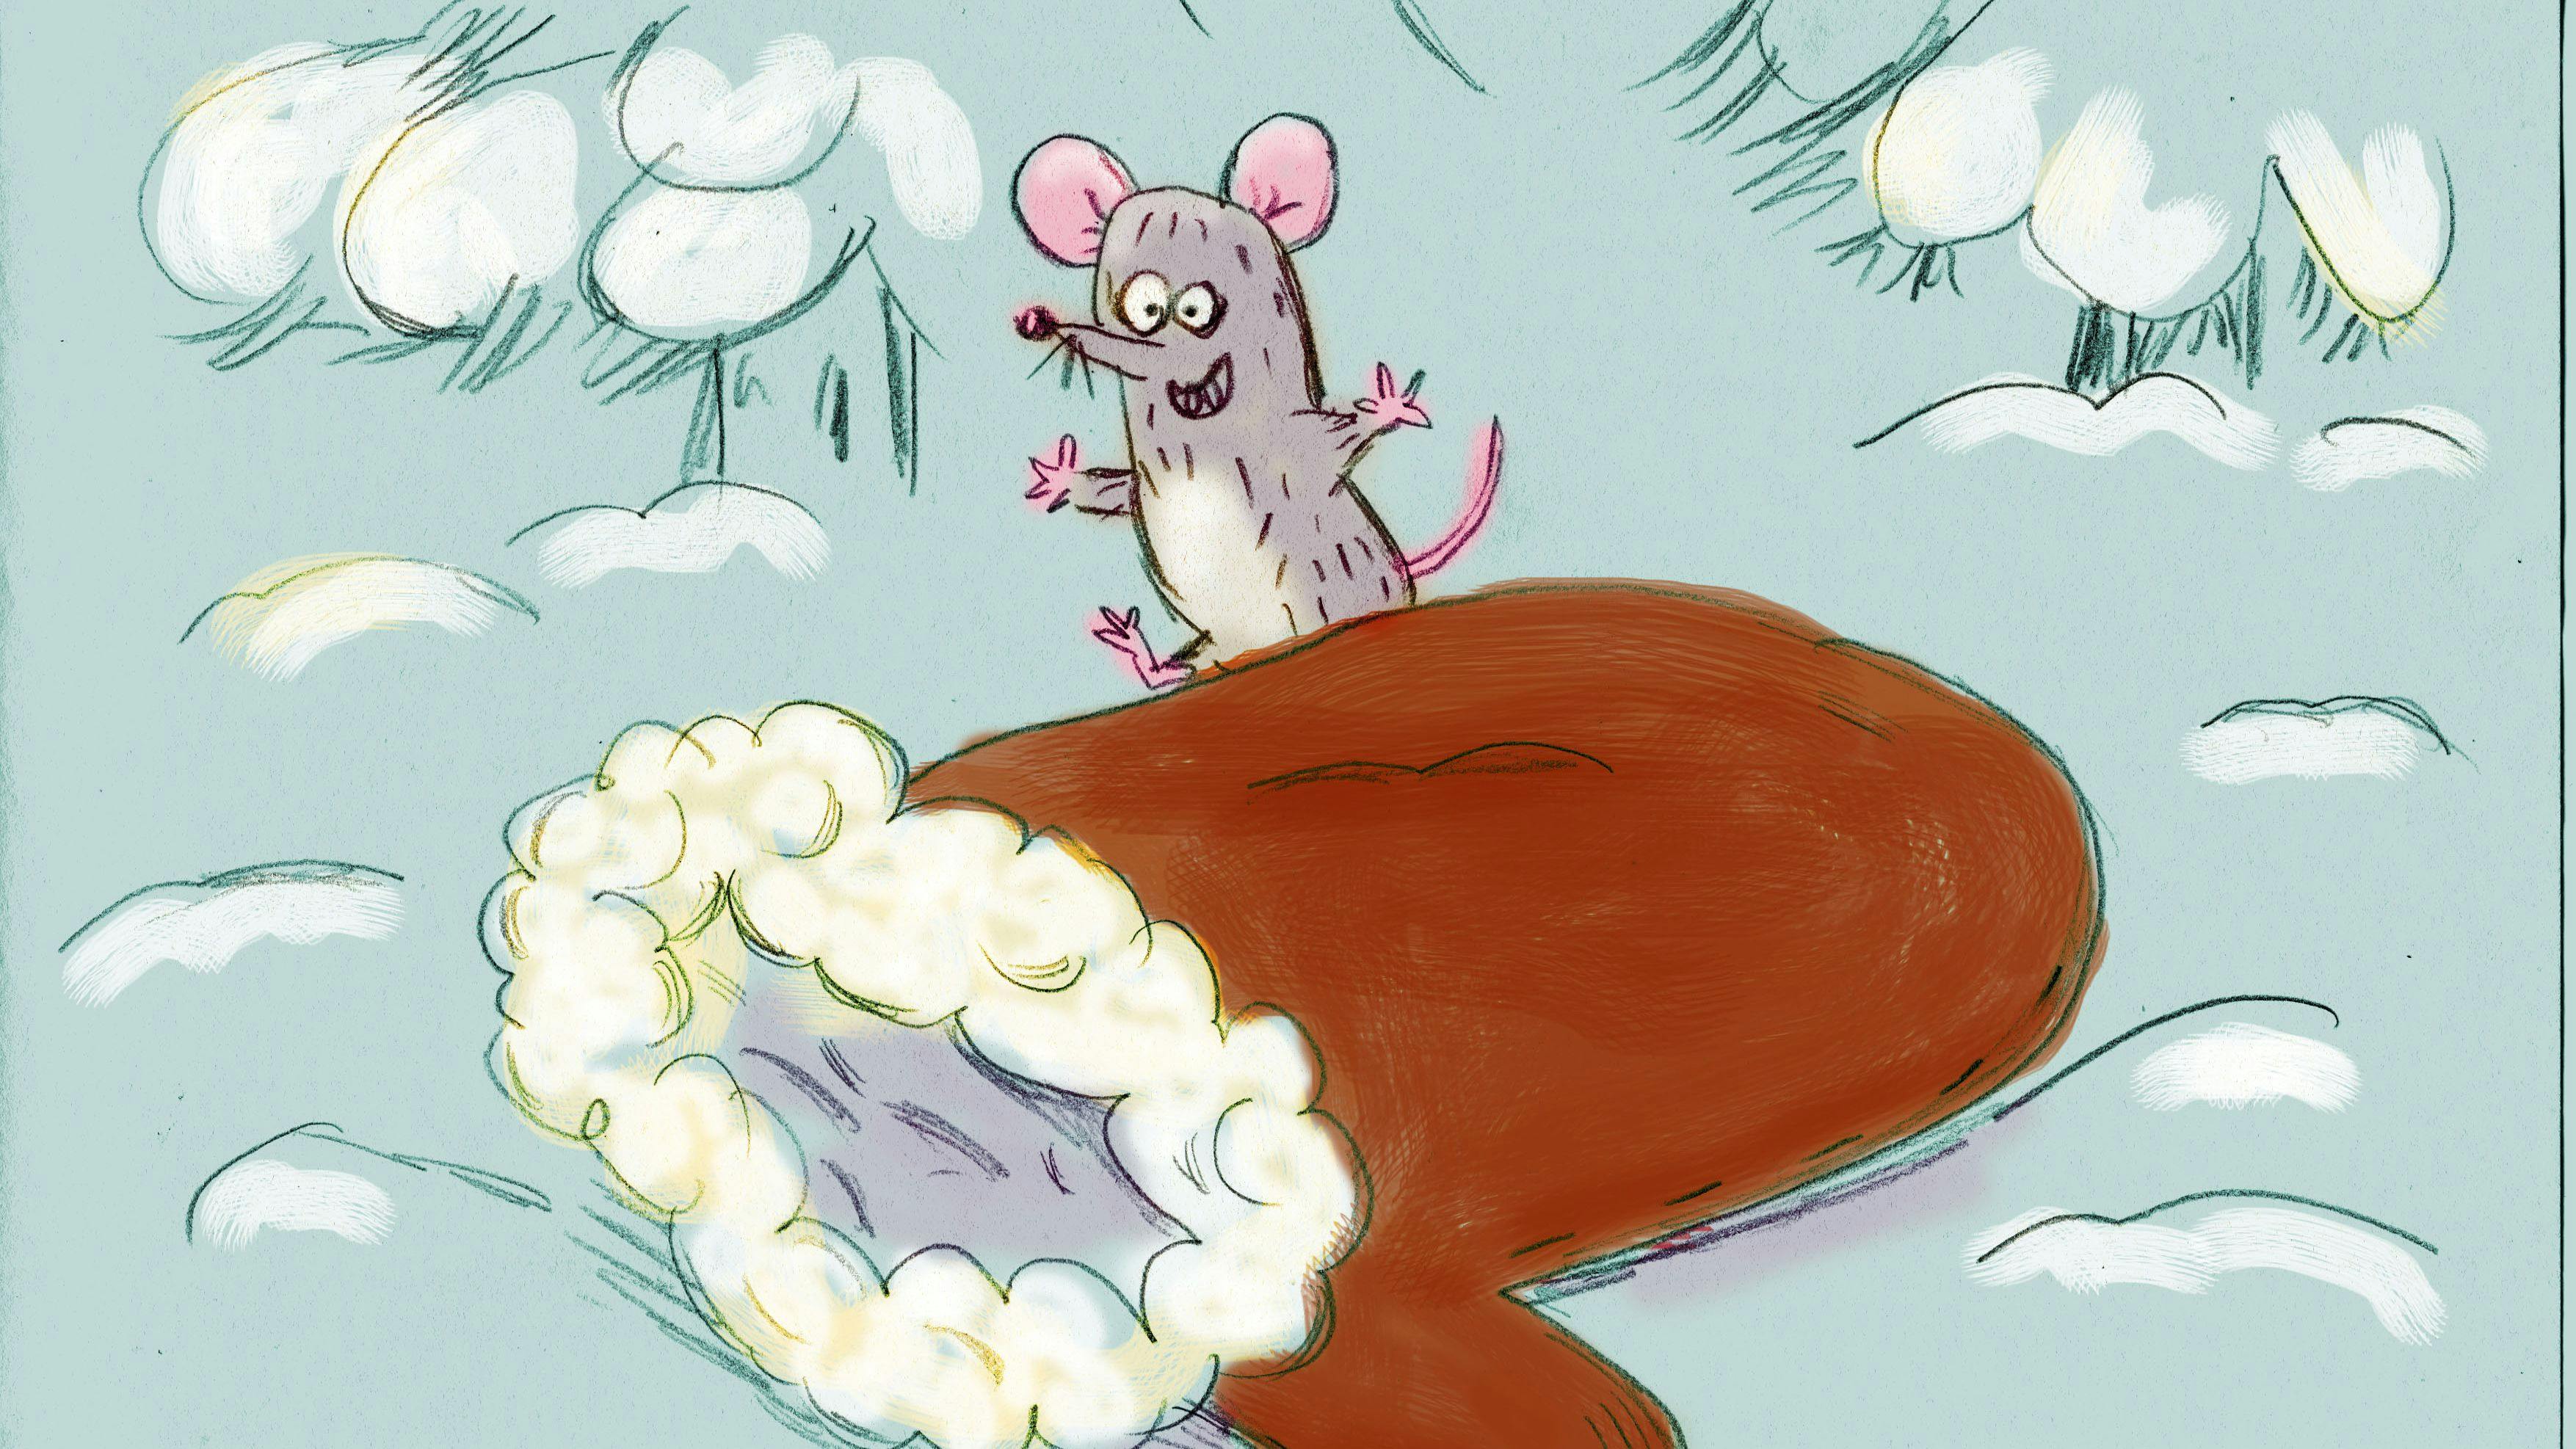  Illustration of a mitten and a mouse drawn by Camilla Kuhn.